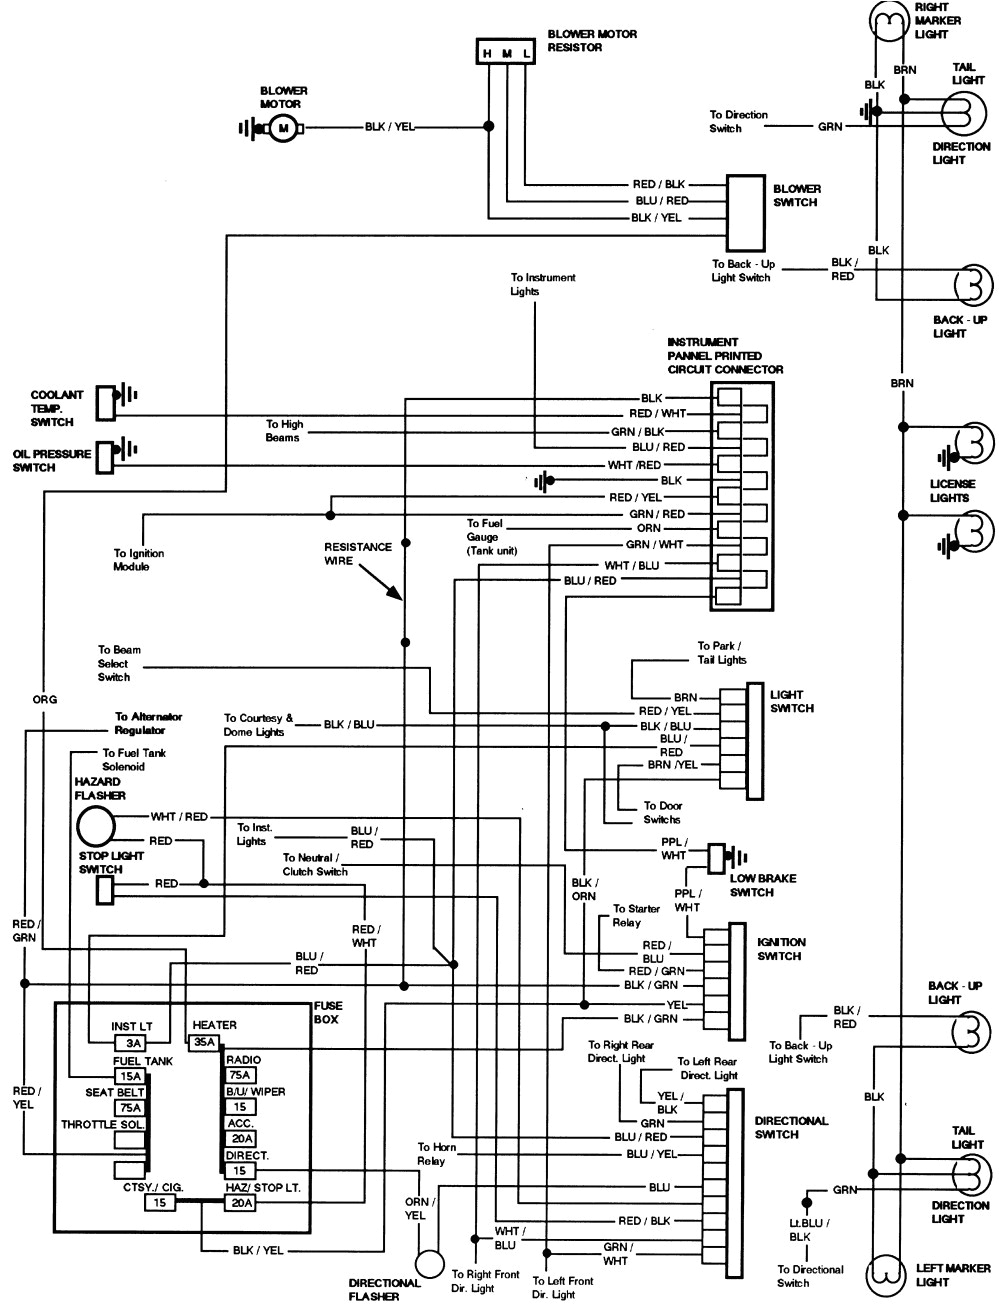 wiring diagram for a 1981 ford f150 wiring diagram toolbox 1981 ford f 150 instrument cluster wiring